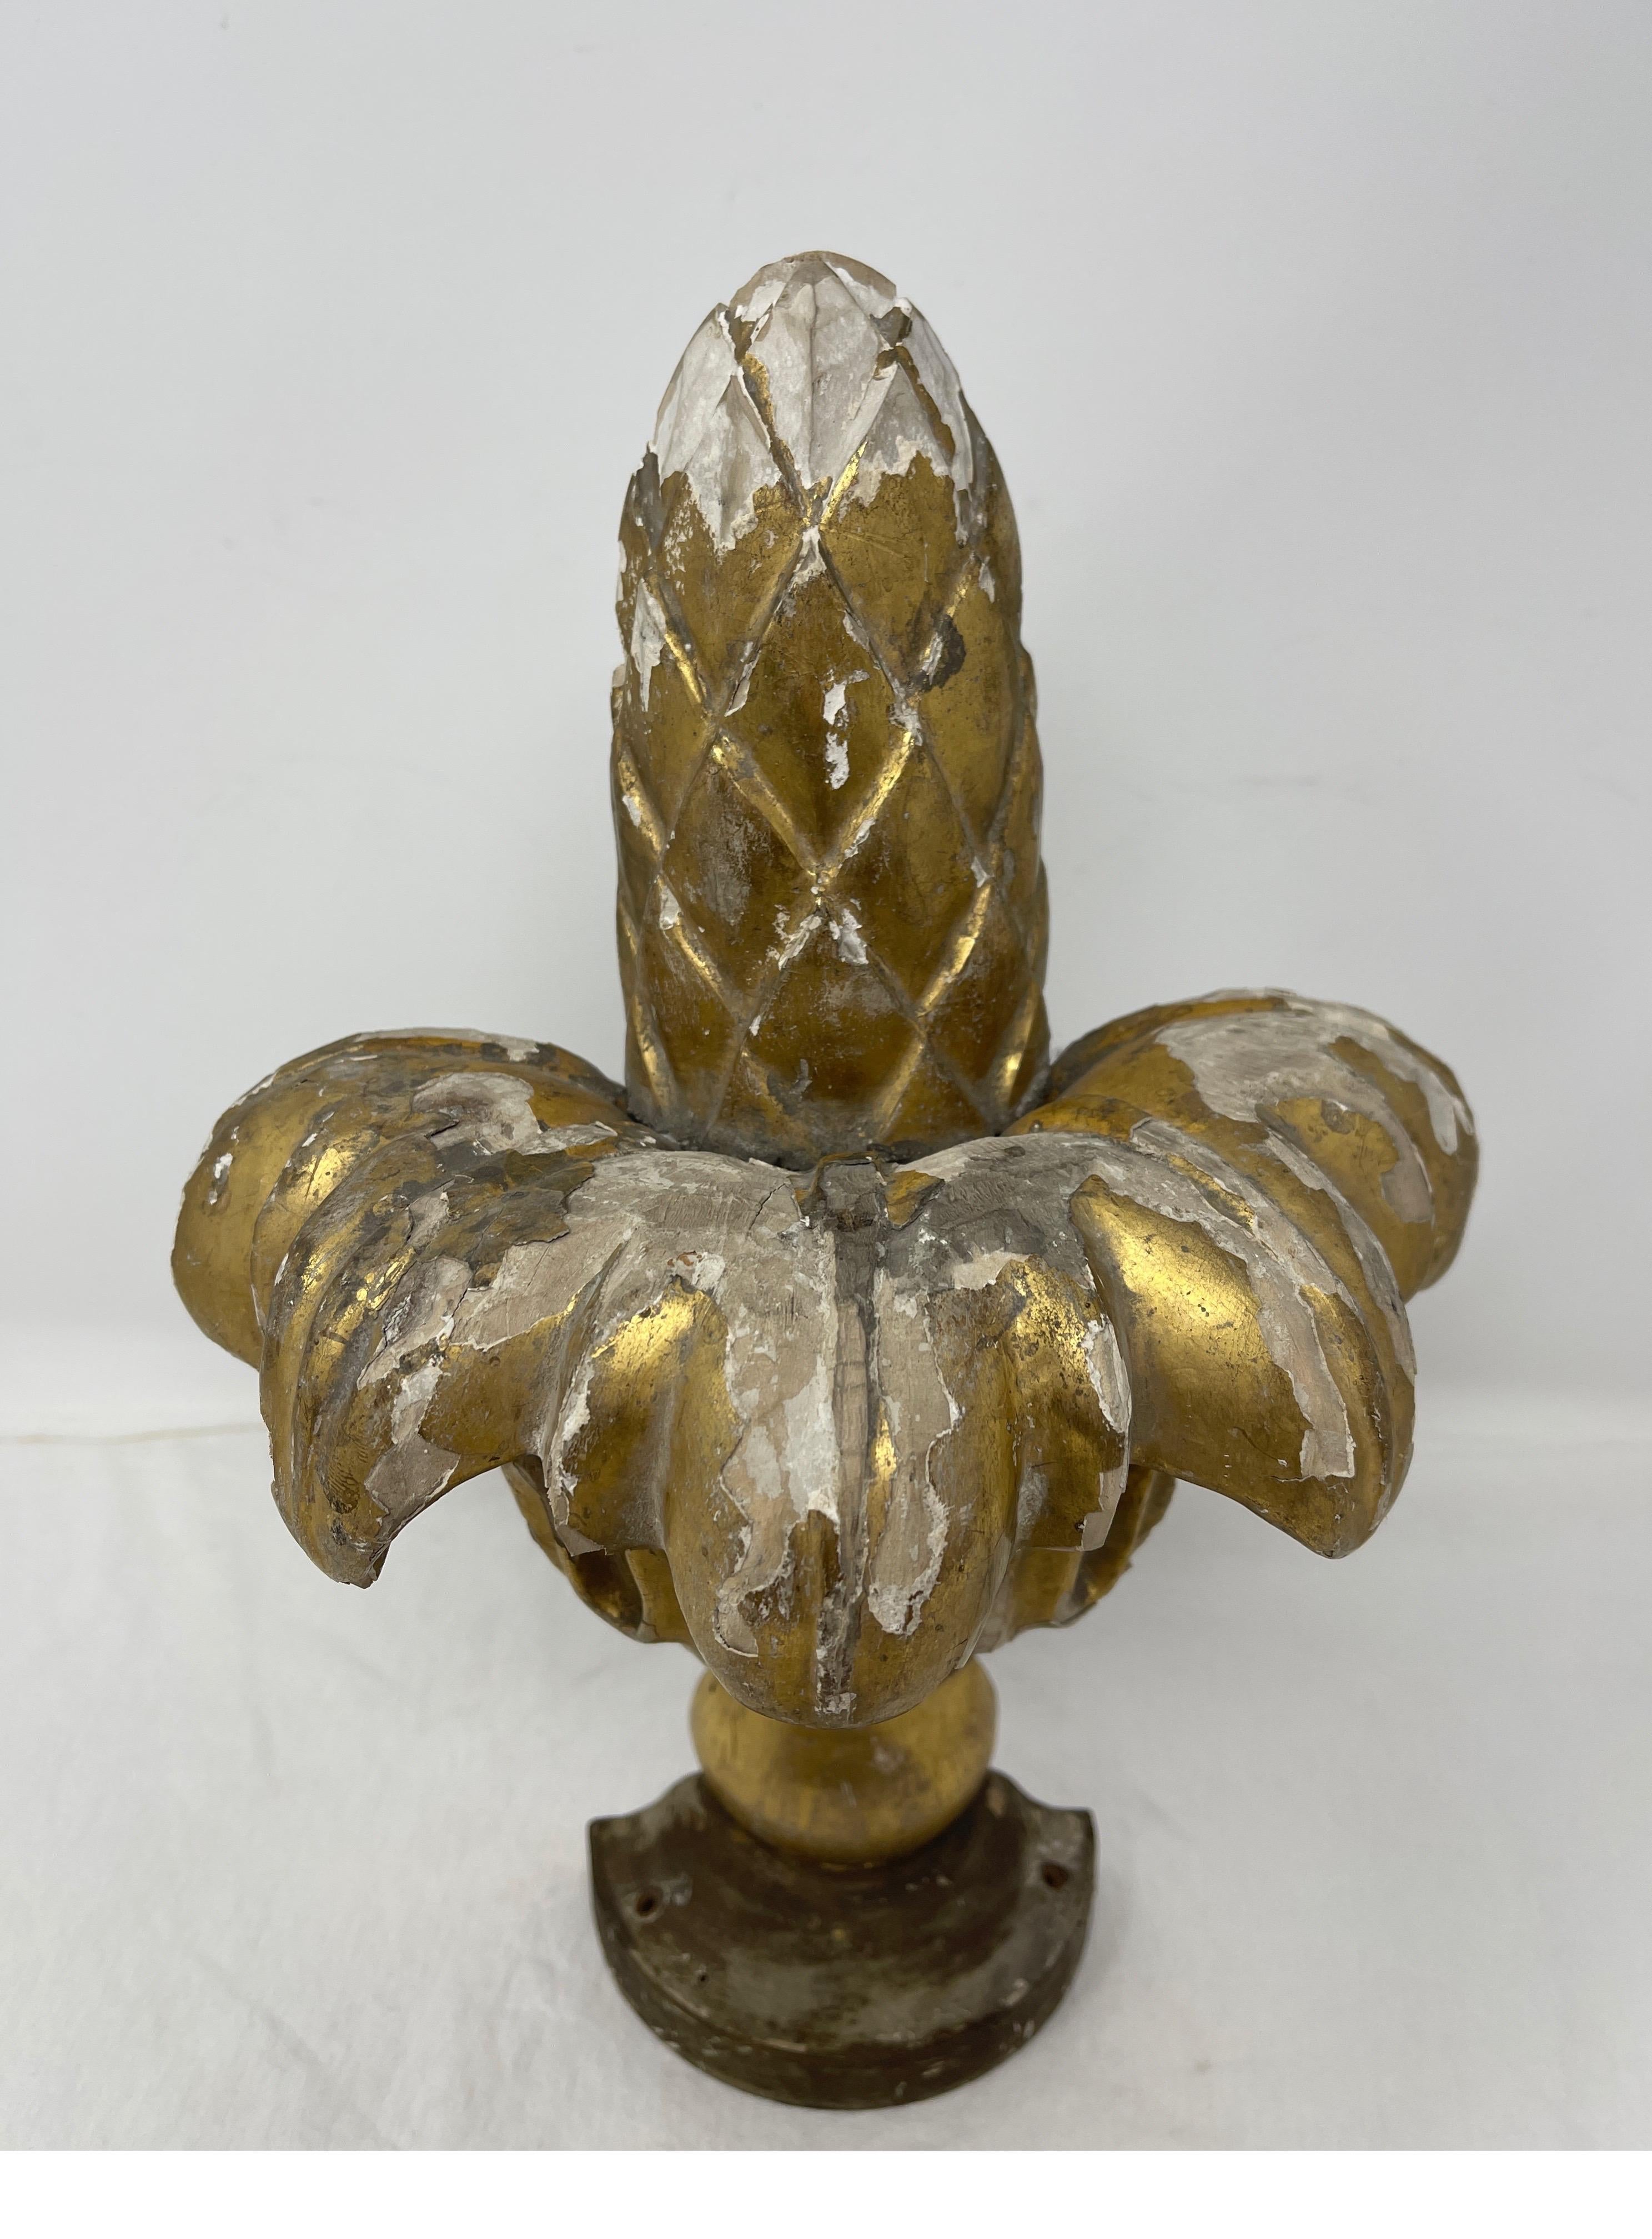 This beautifully aged gold leafed finial in the traditional shape of a cone would beautifully compliment any mantel or desk. This architectural element could also hang on a wall as an art piece.


Measures: 5”D x 8 1/2”W x 12 1/2”H.